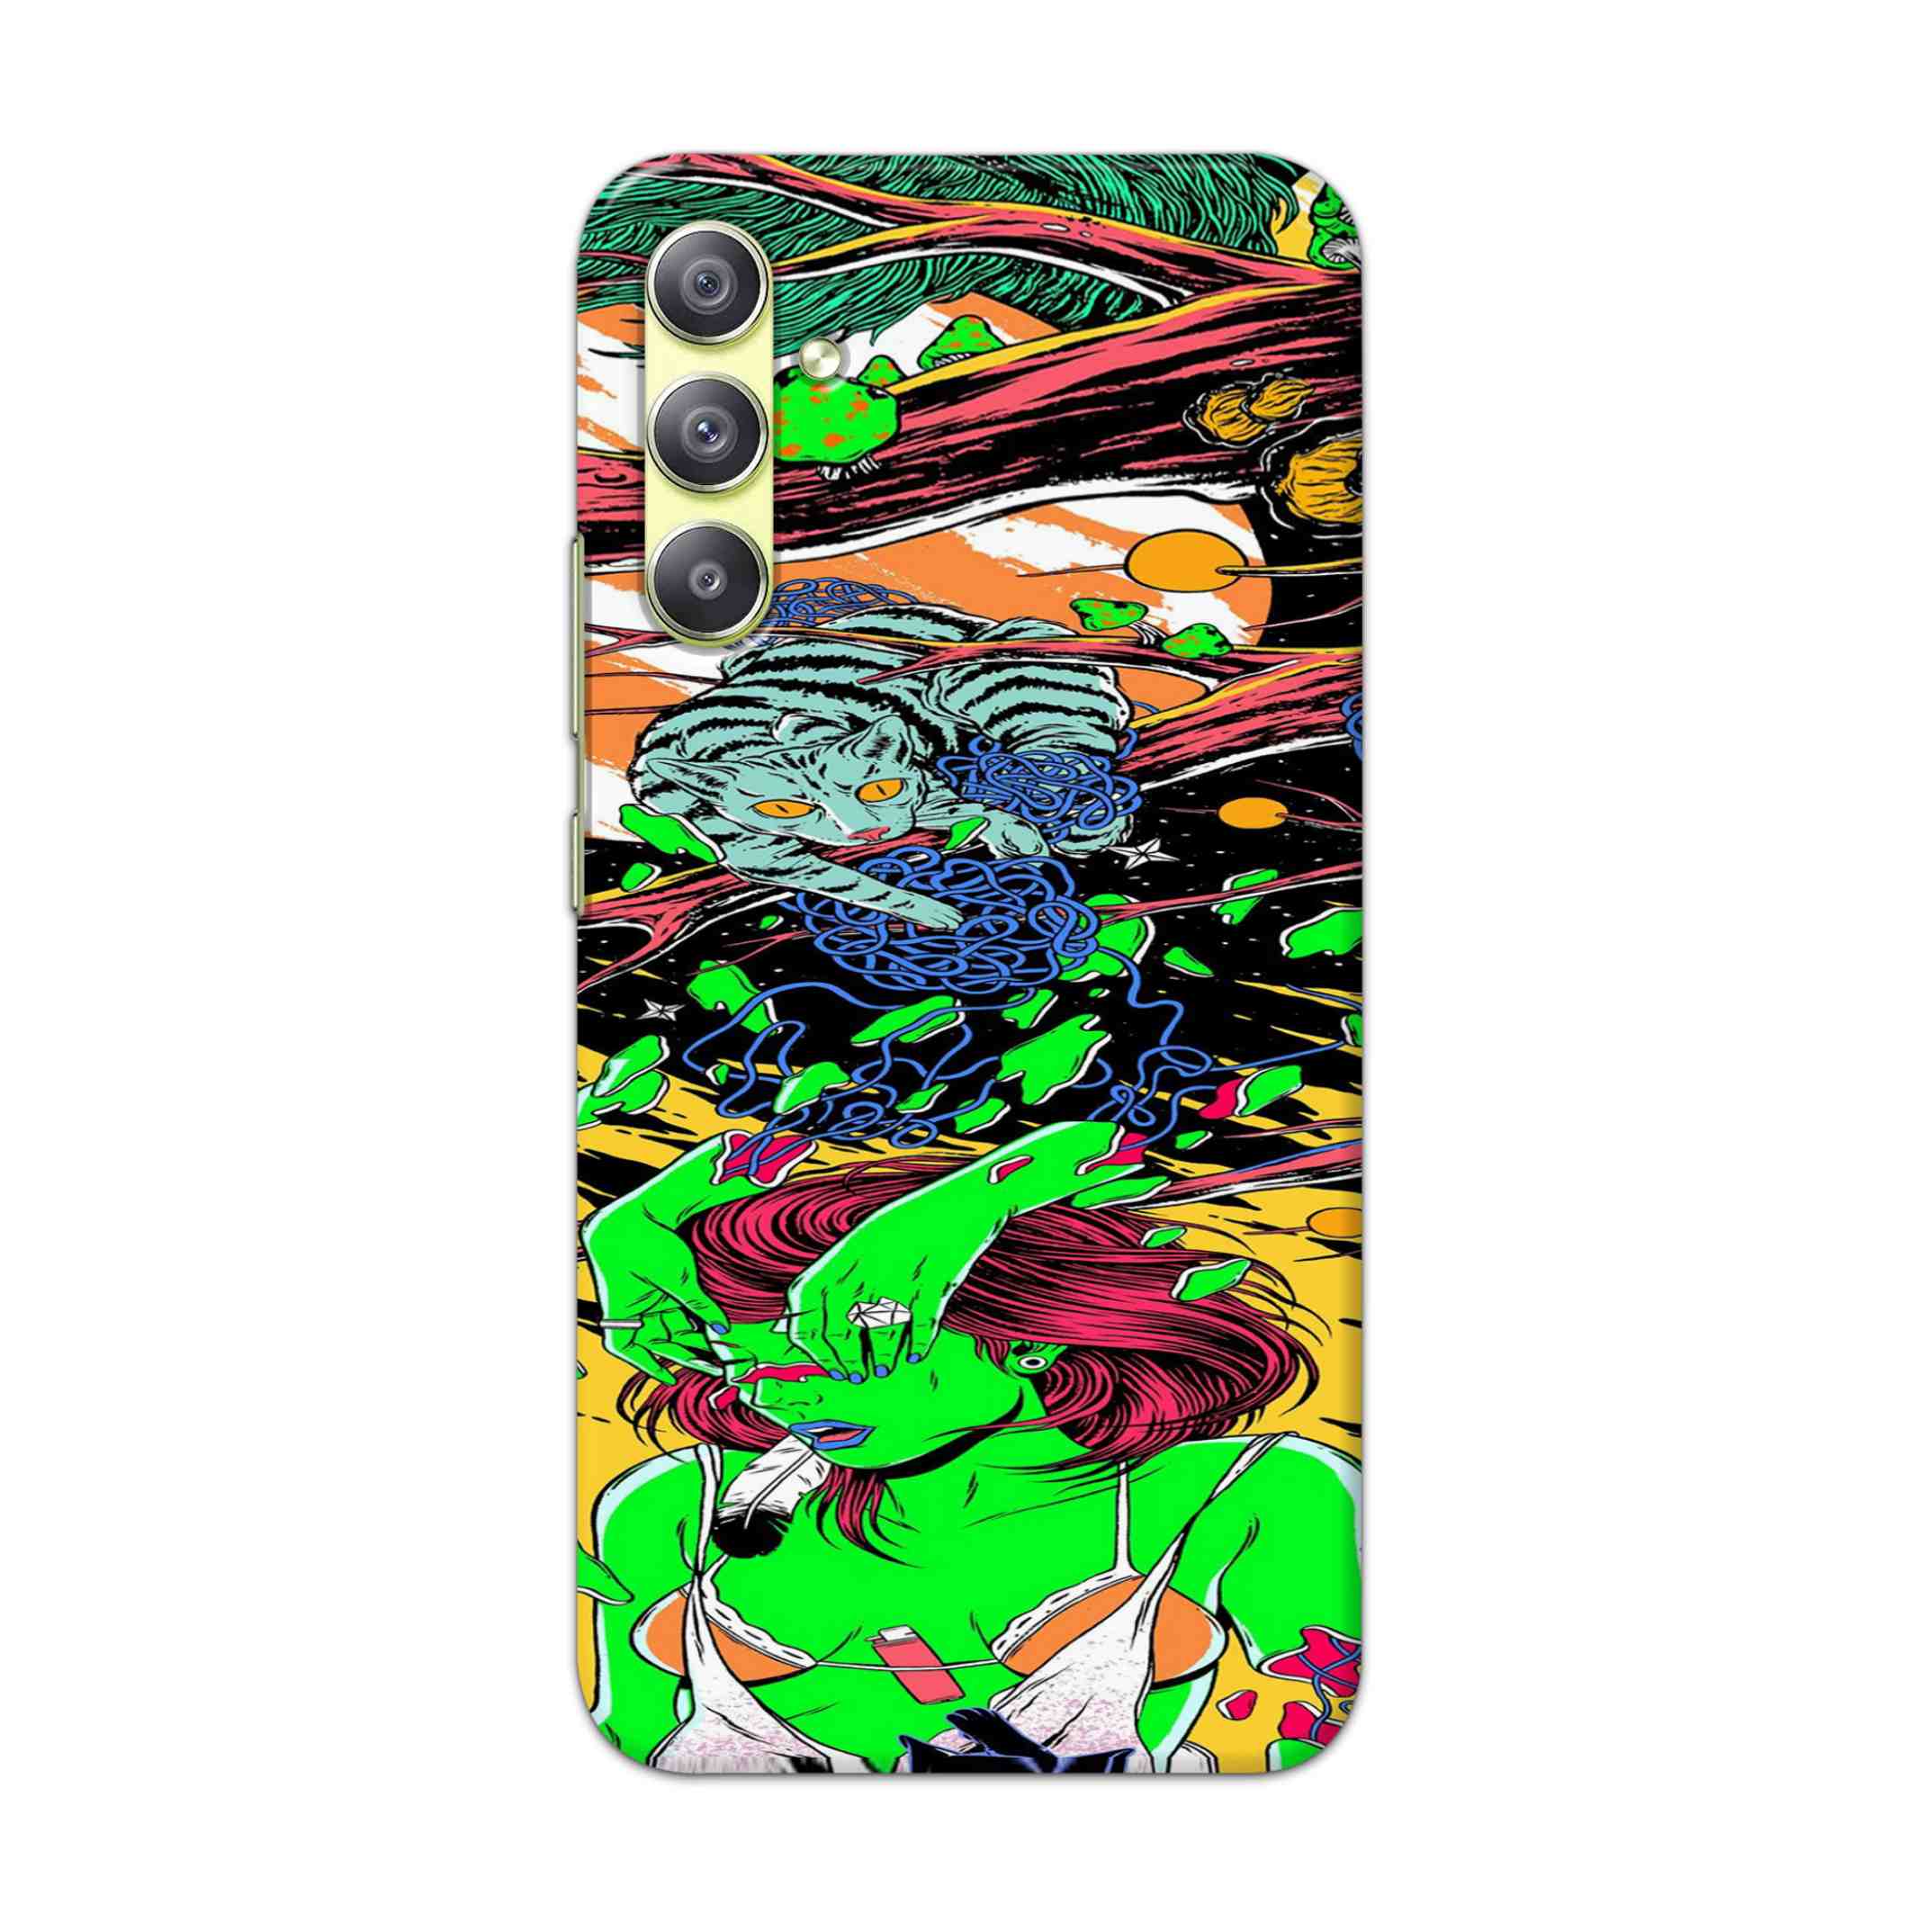 Buy Green Girl Art Hard Back Mobile Phone Case Cover For Samsung Galaxy A34 5G Online